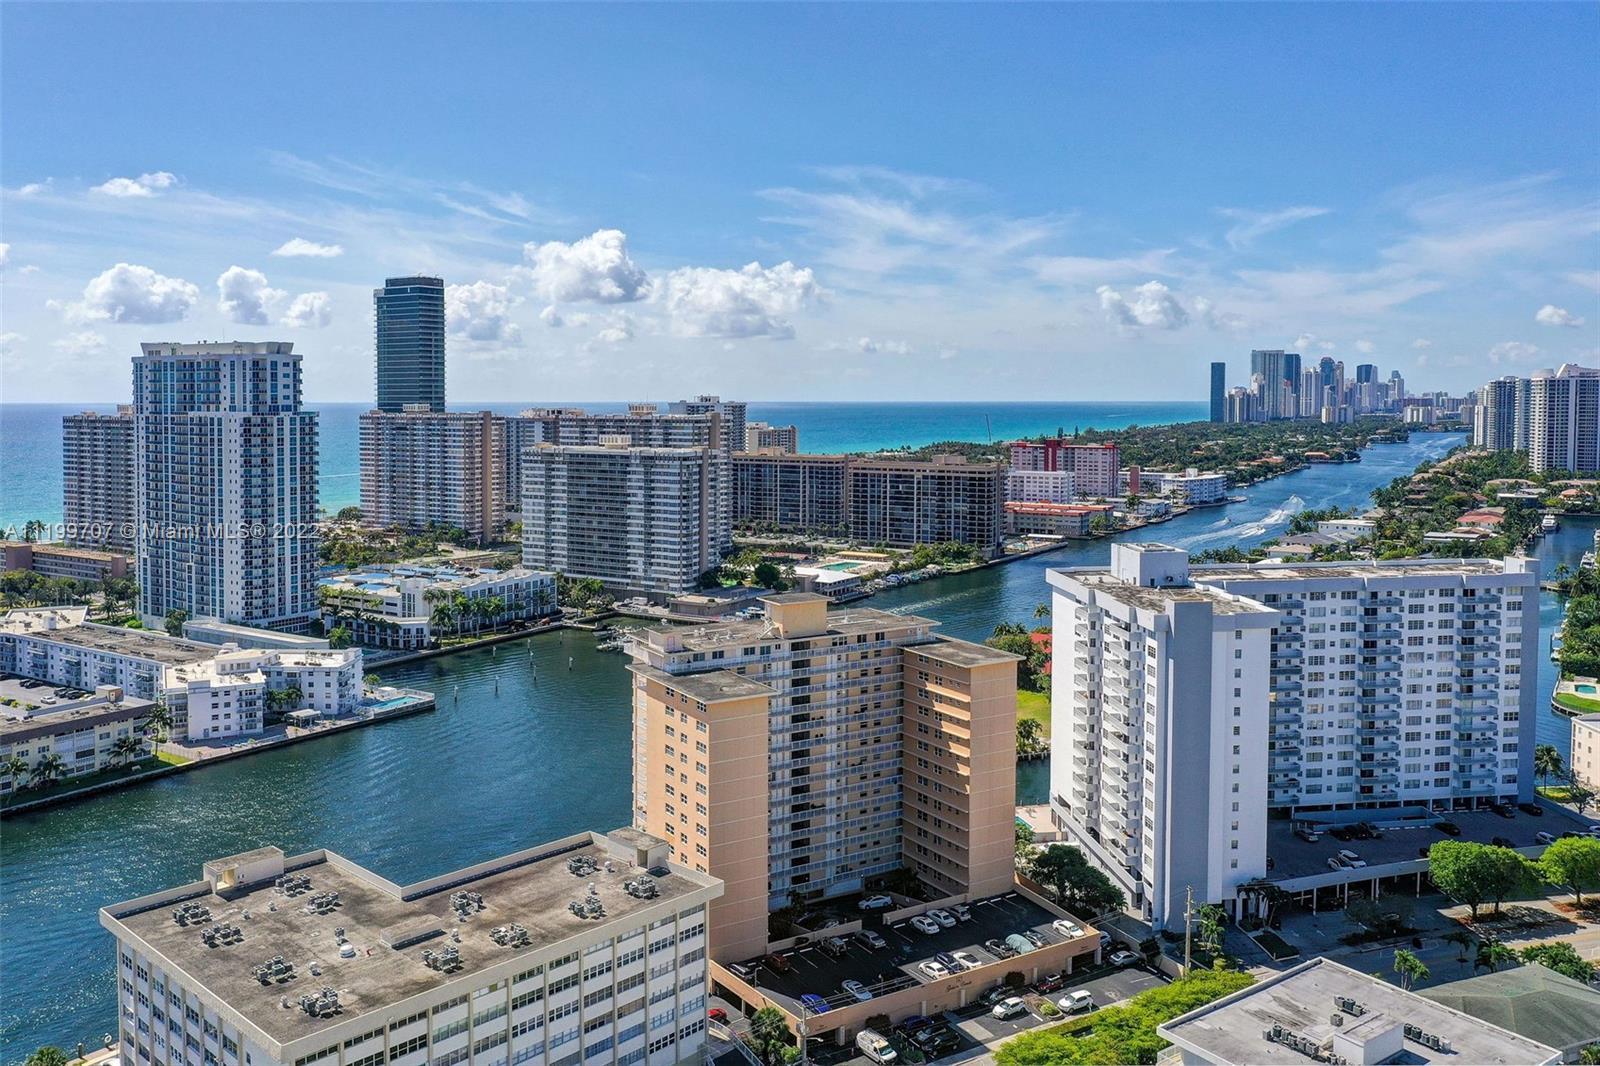 Hallandale Beach Penthouse with breathtaking panoramic inter coastal & ocean views. This private 3 b